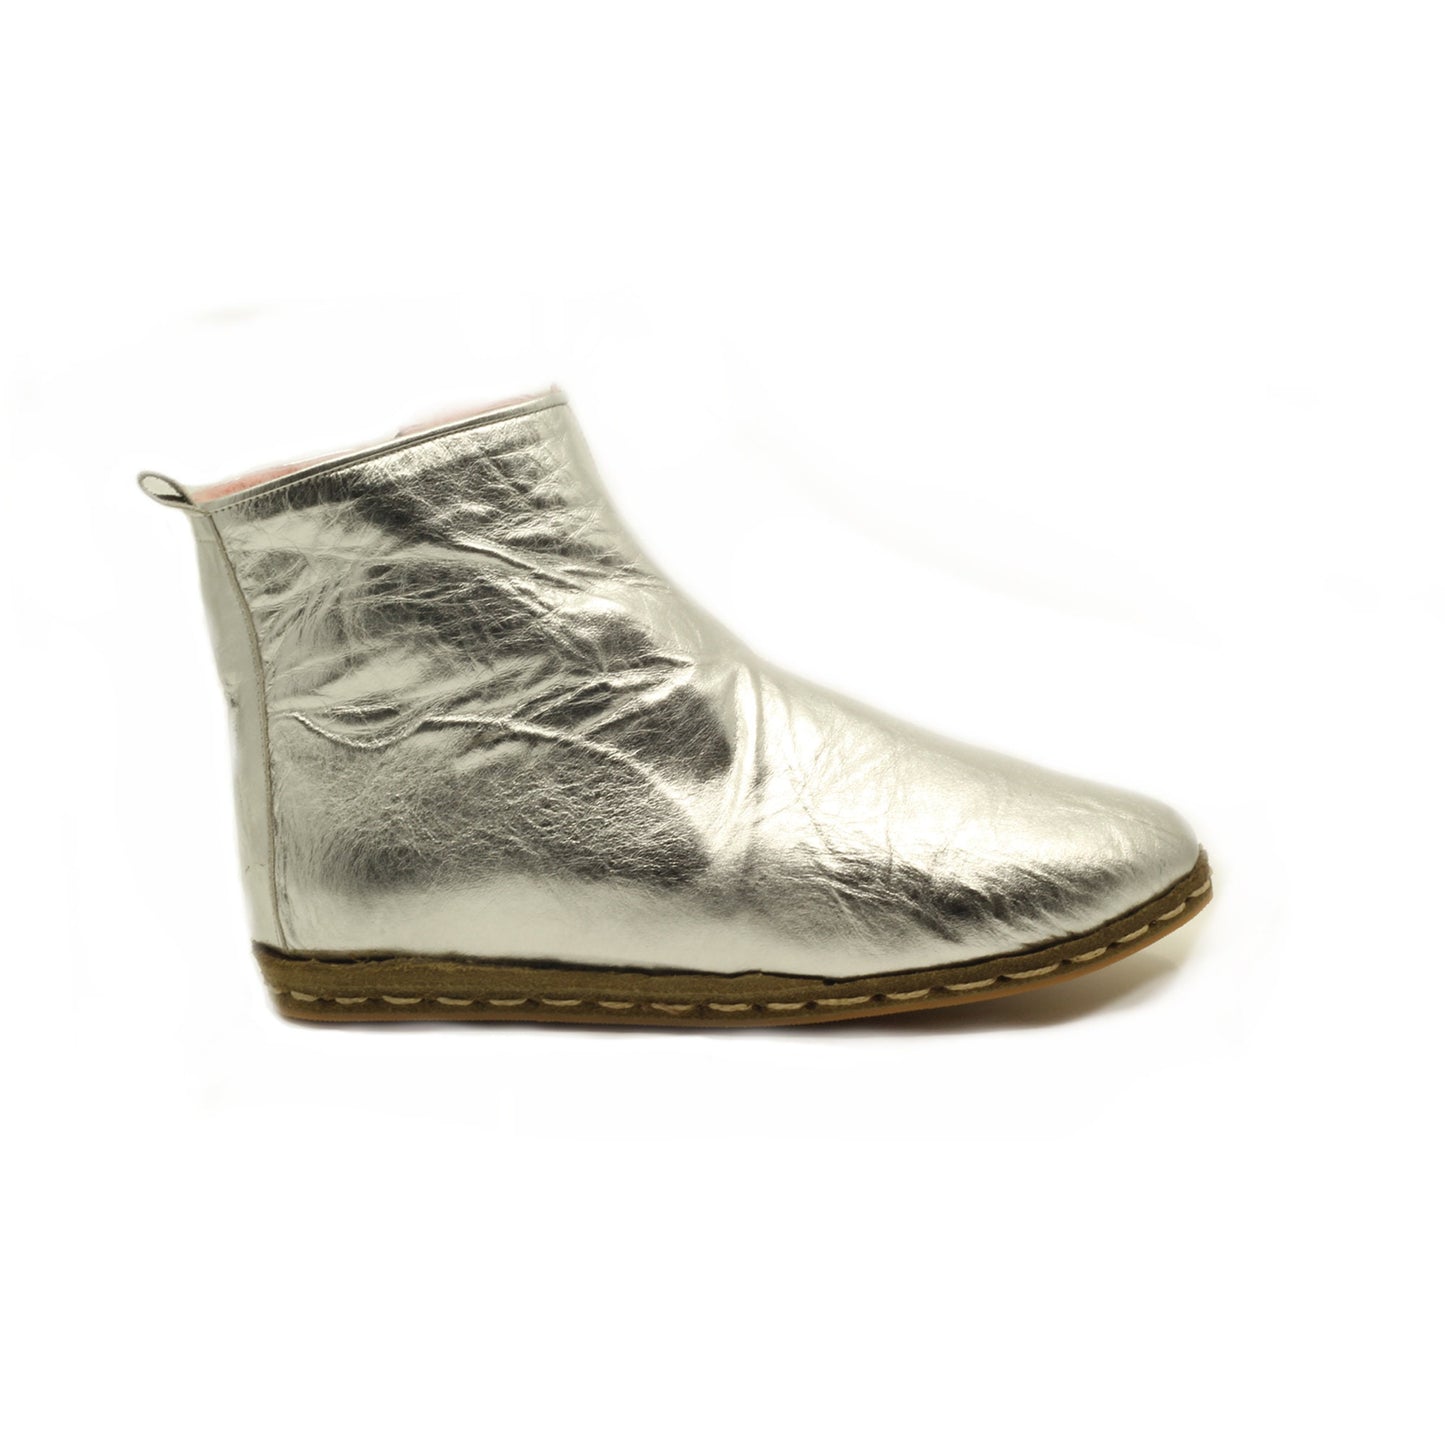 Women's Boot, Real Tuscan Fur Inside, All Leather, Shine Silver